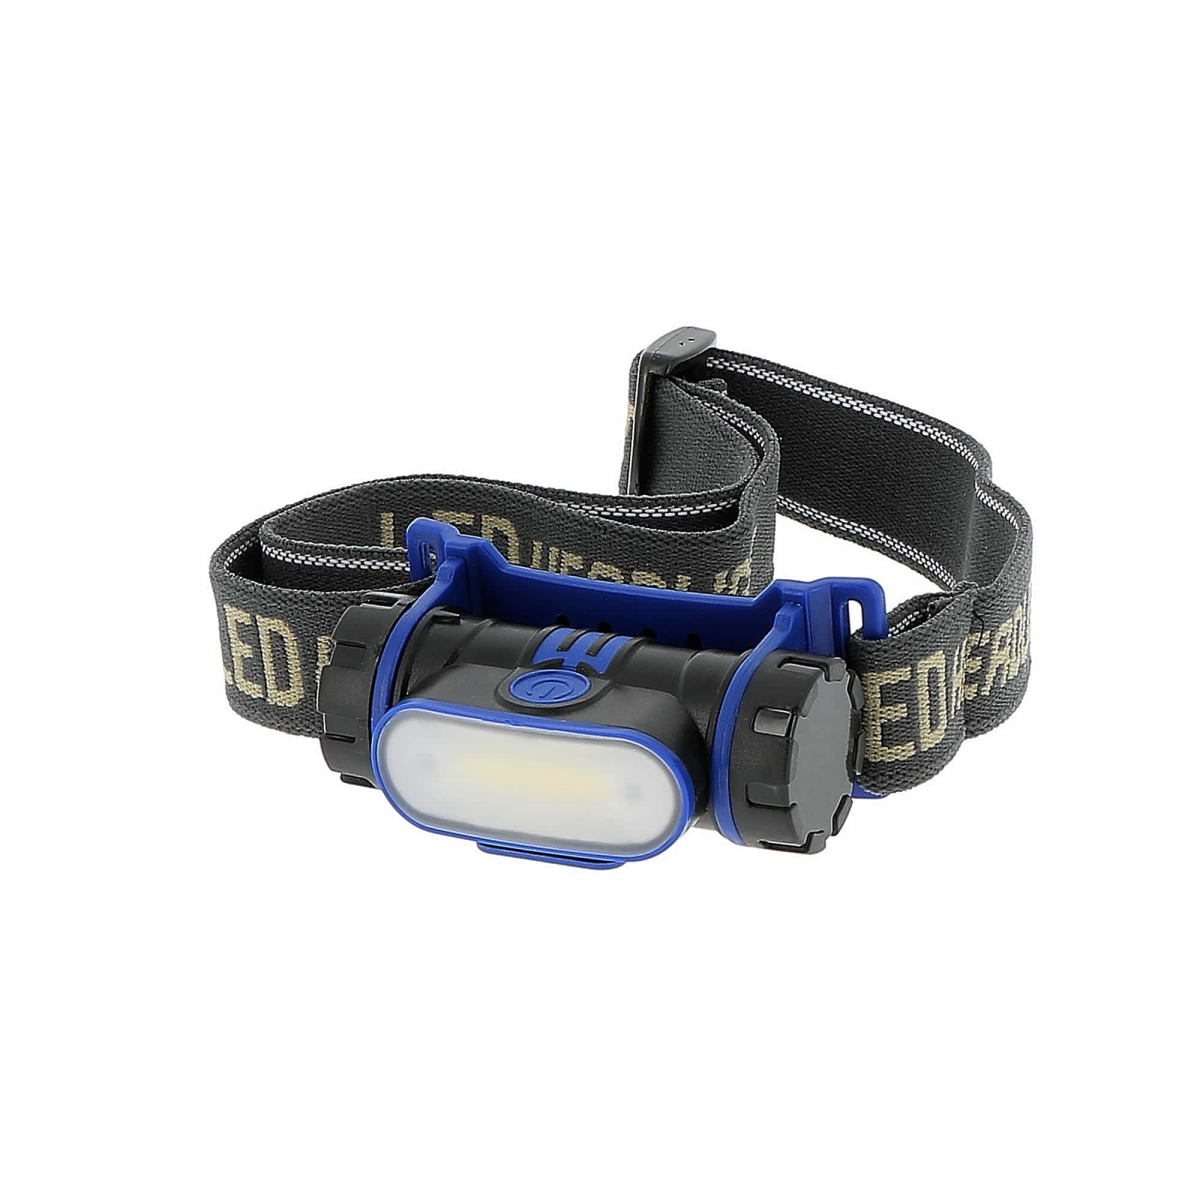 Rechargeable LED headlamp.